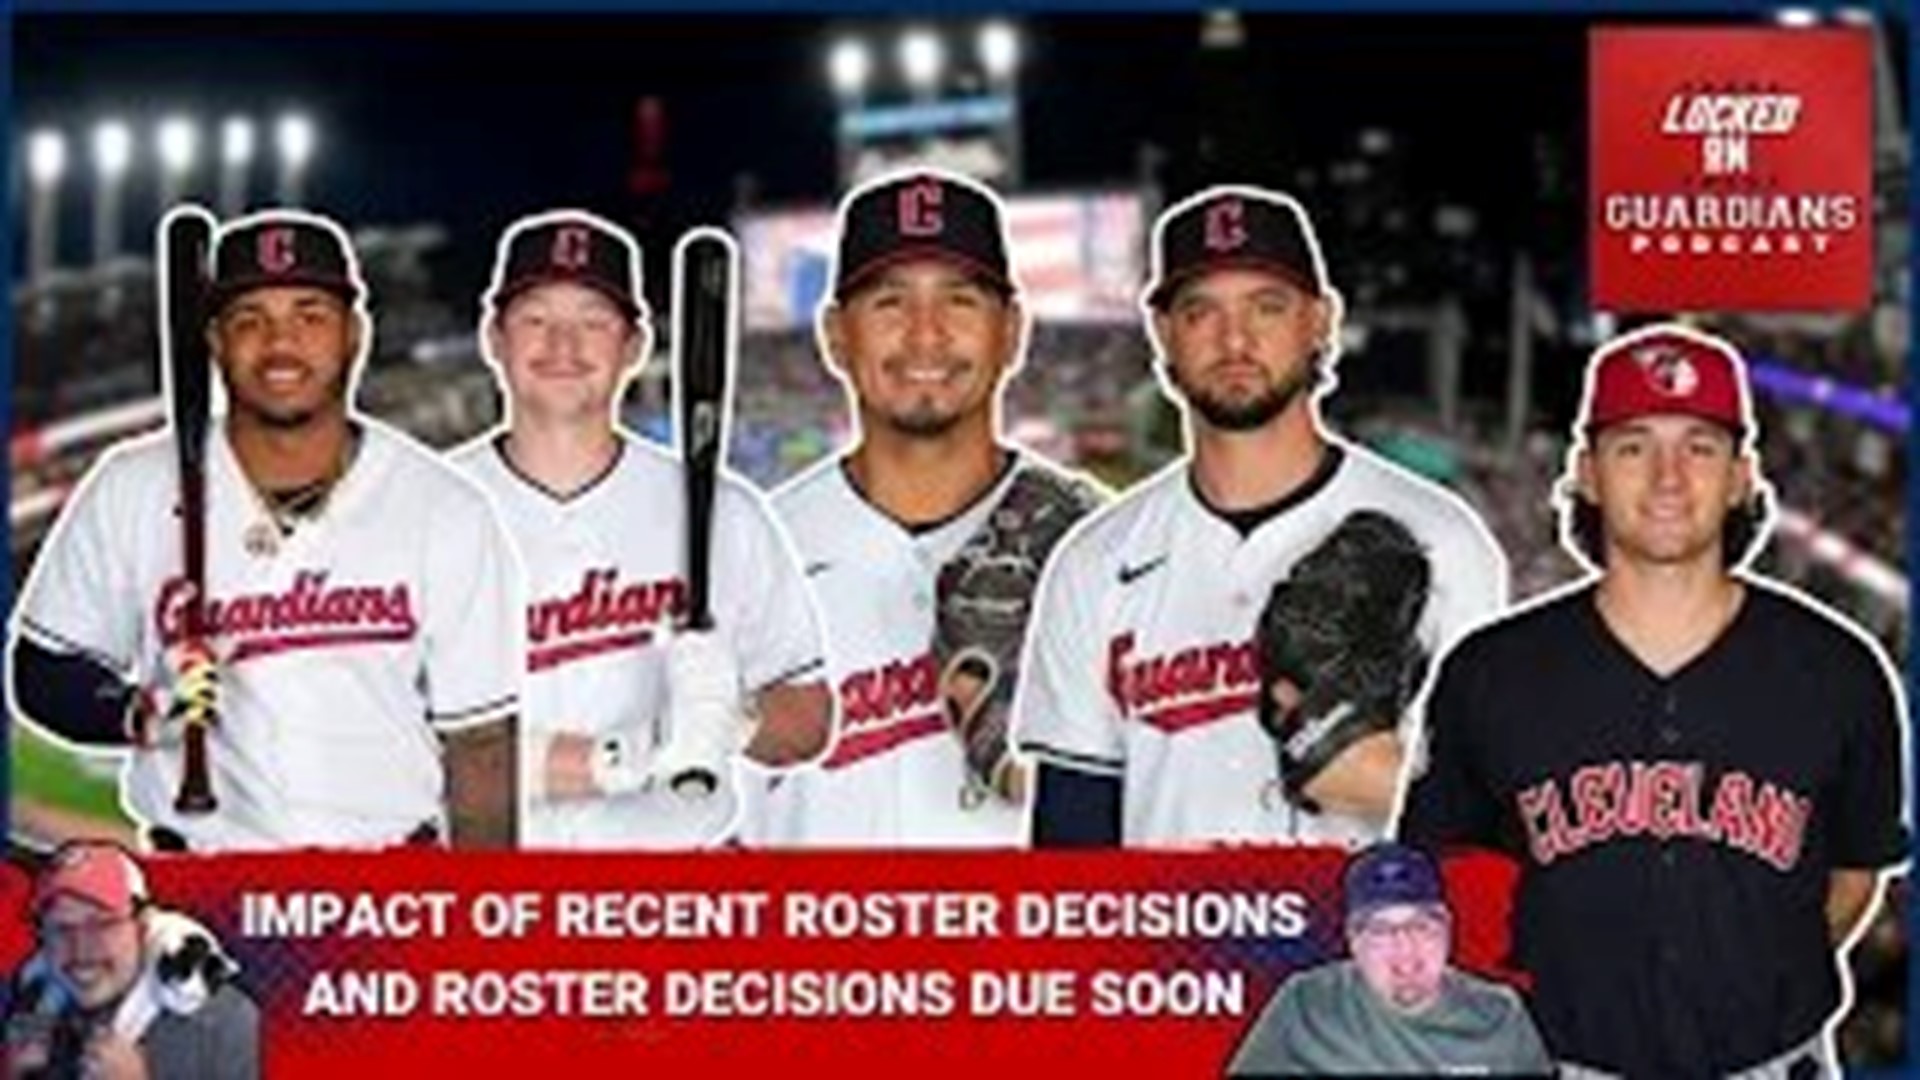 Opening Day is just a week away. And while we say it's sort of an artificial deadline, it does have some effect on roster decisions leading up to the opening roster.